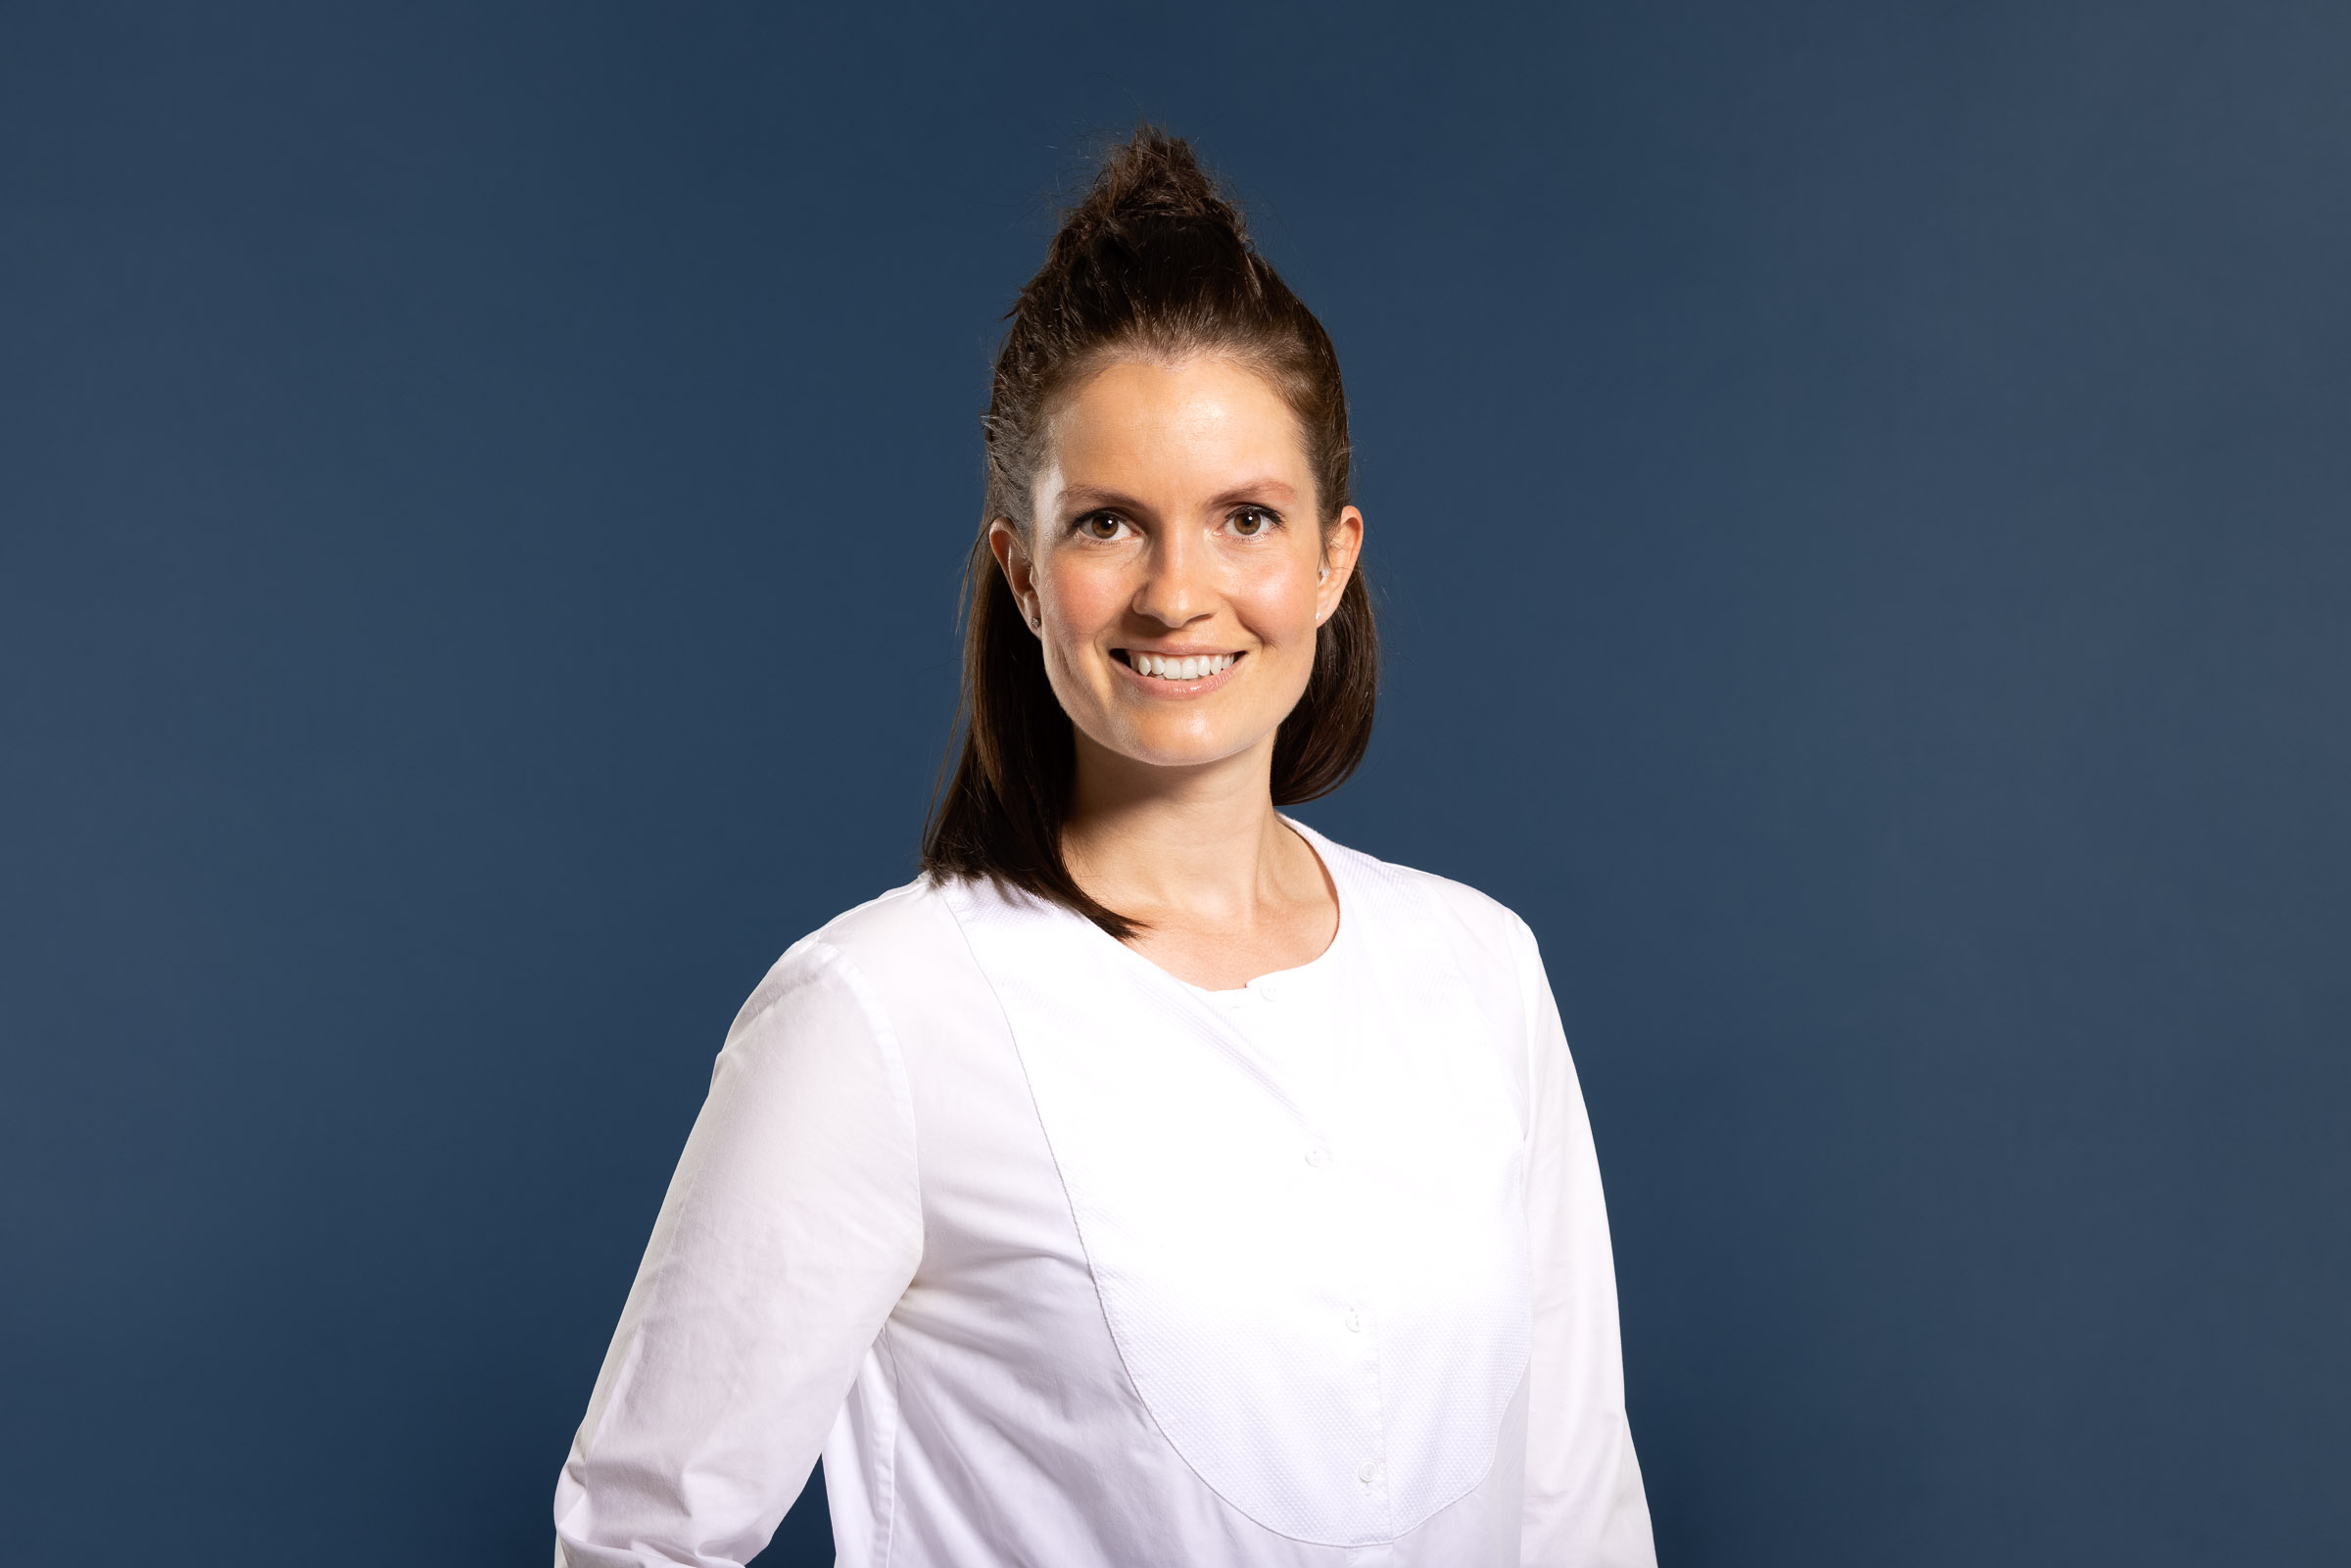 I am Julia Malle and have been with CARextern for 3 ½ years. I support various projects and am currently working in Customer Relationship Management. Working in a small team is super fun and I am looking forward to more exciting projects.